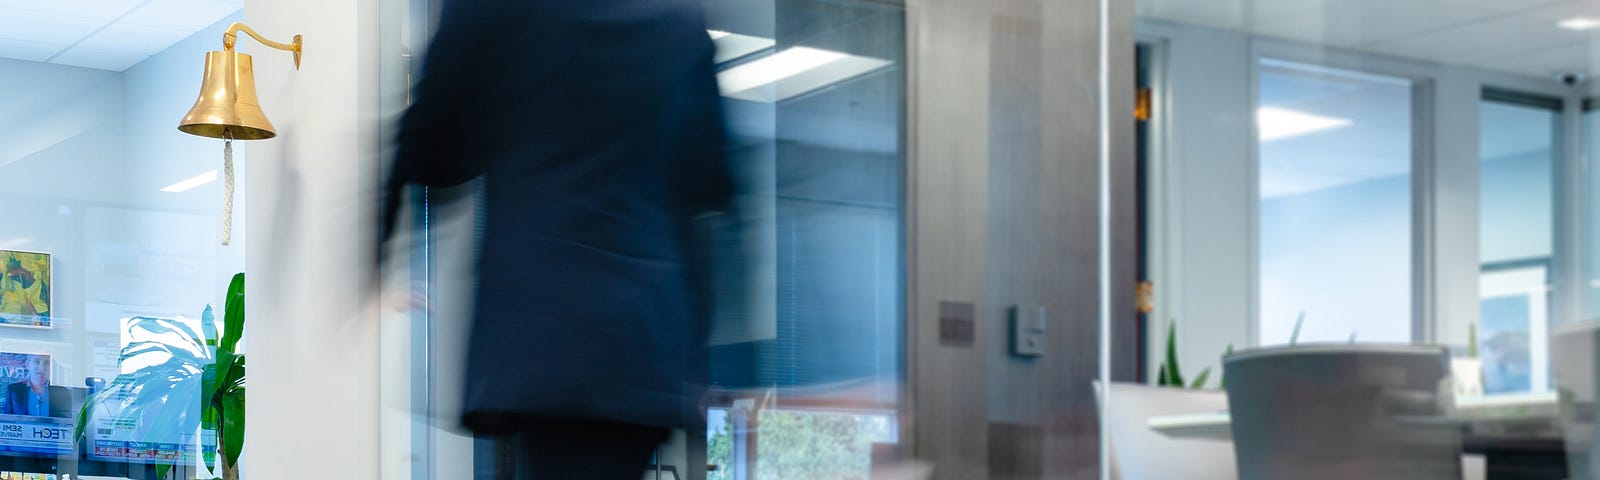 A blurry image of a man walking very quickly through an office.